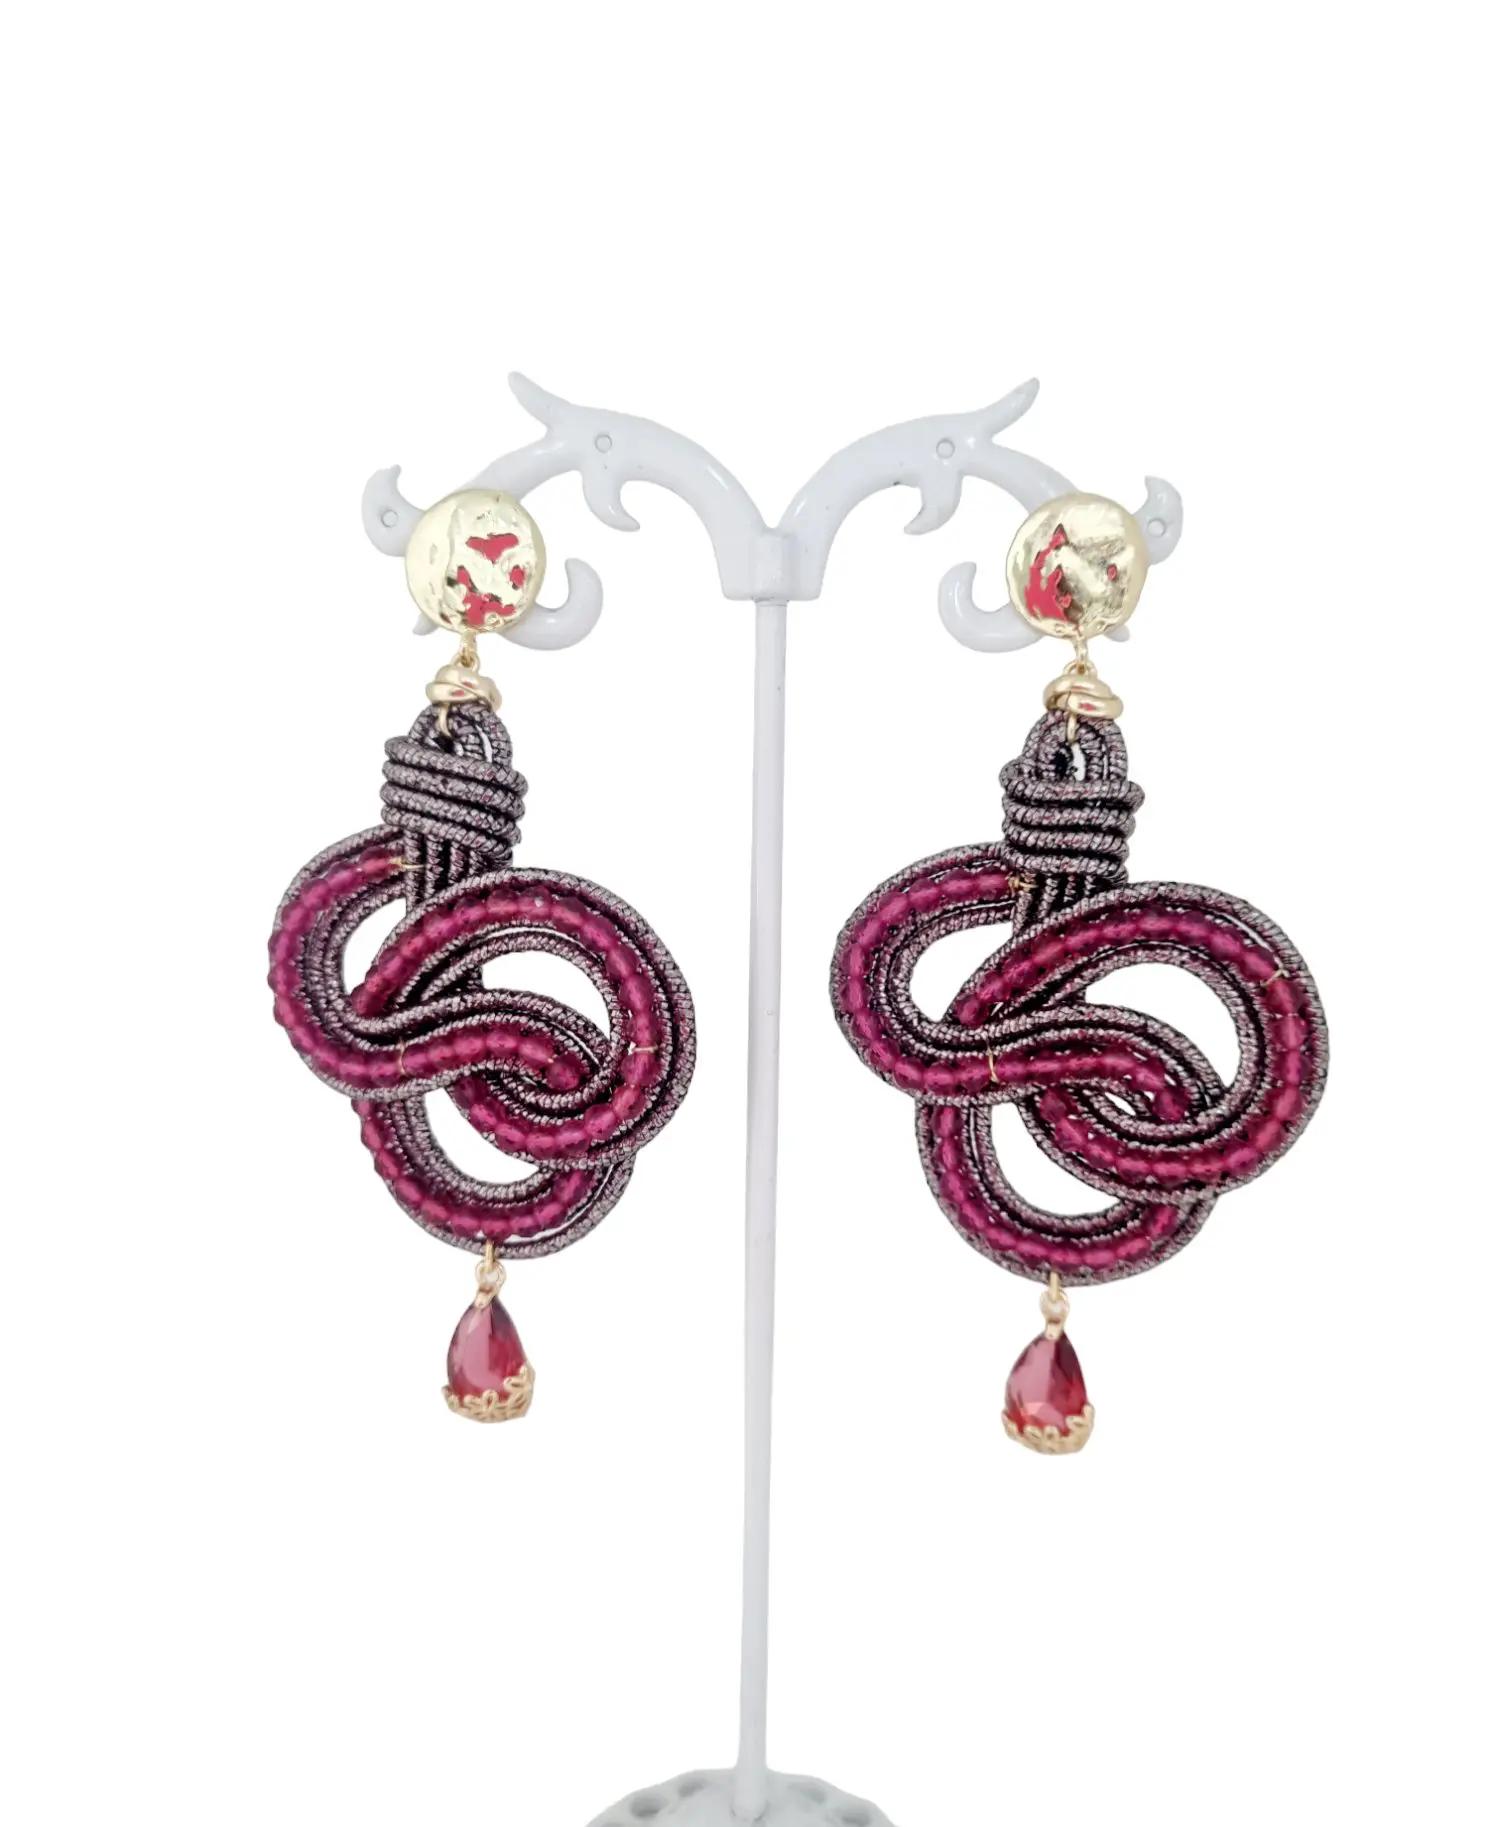 Earrings handcrafted with glittery fabric and fuchsia crystals. Length 8cm Weight 8.2g